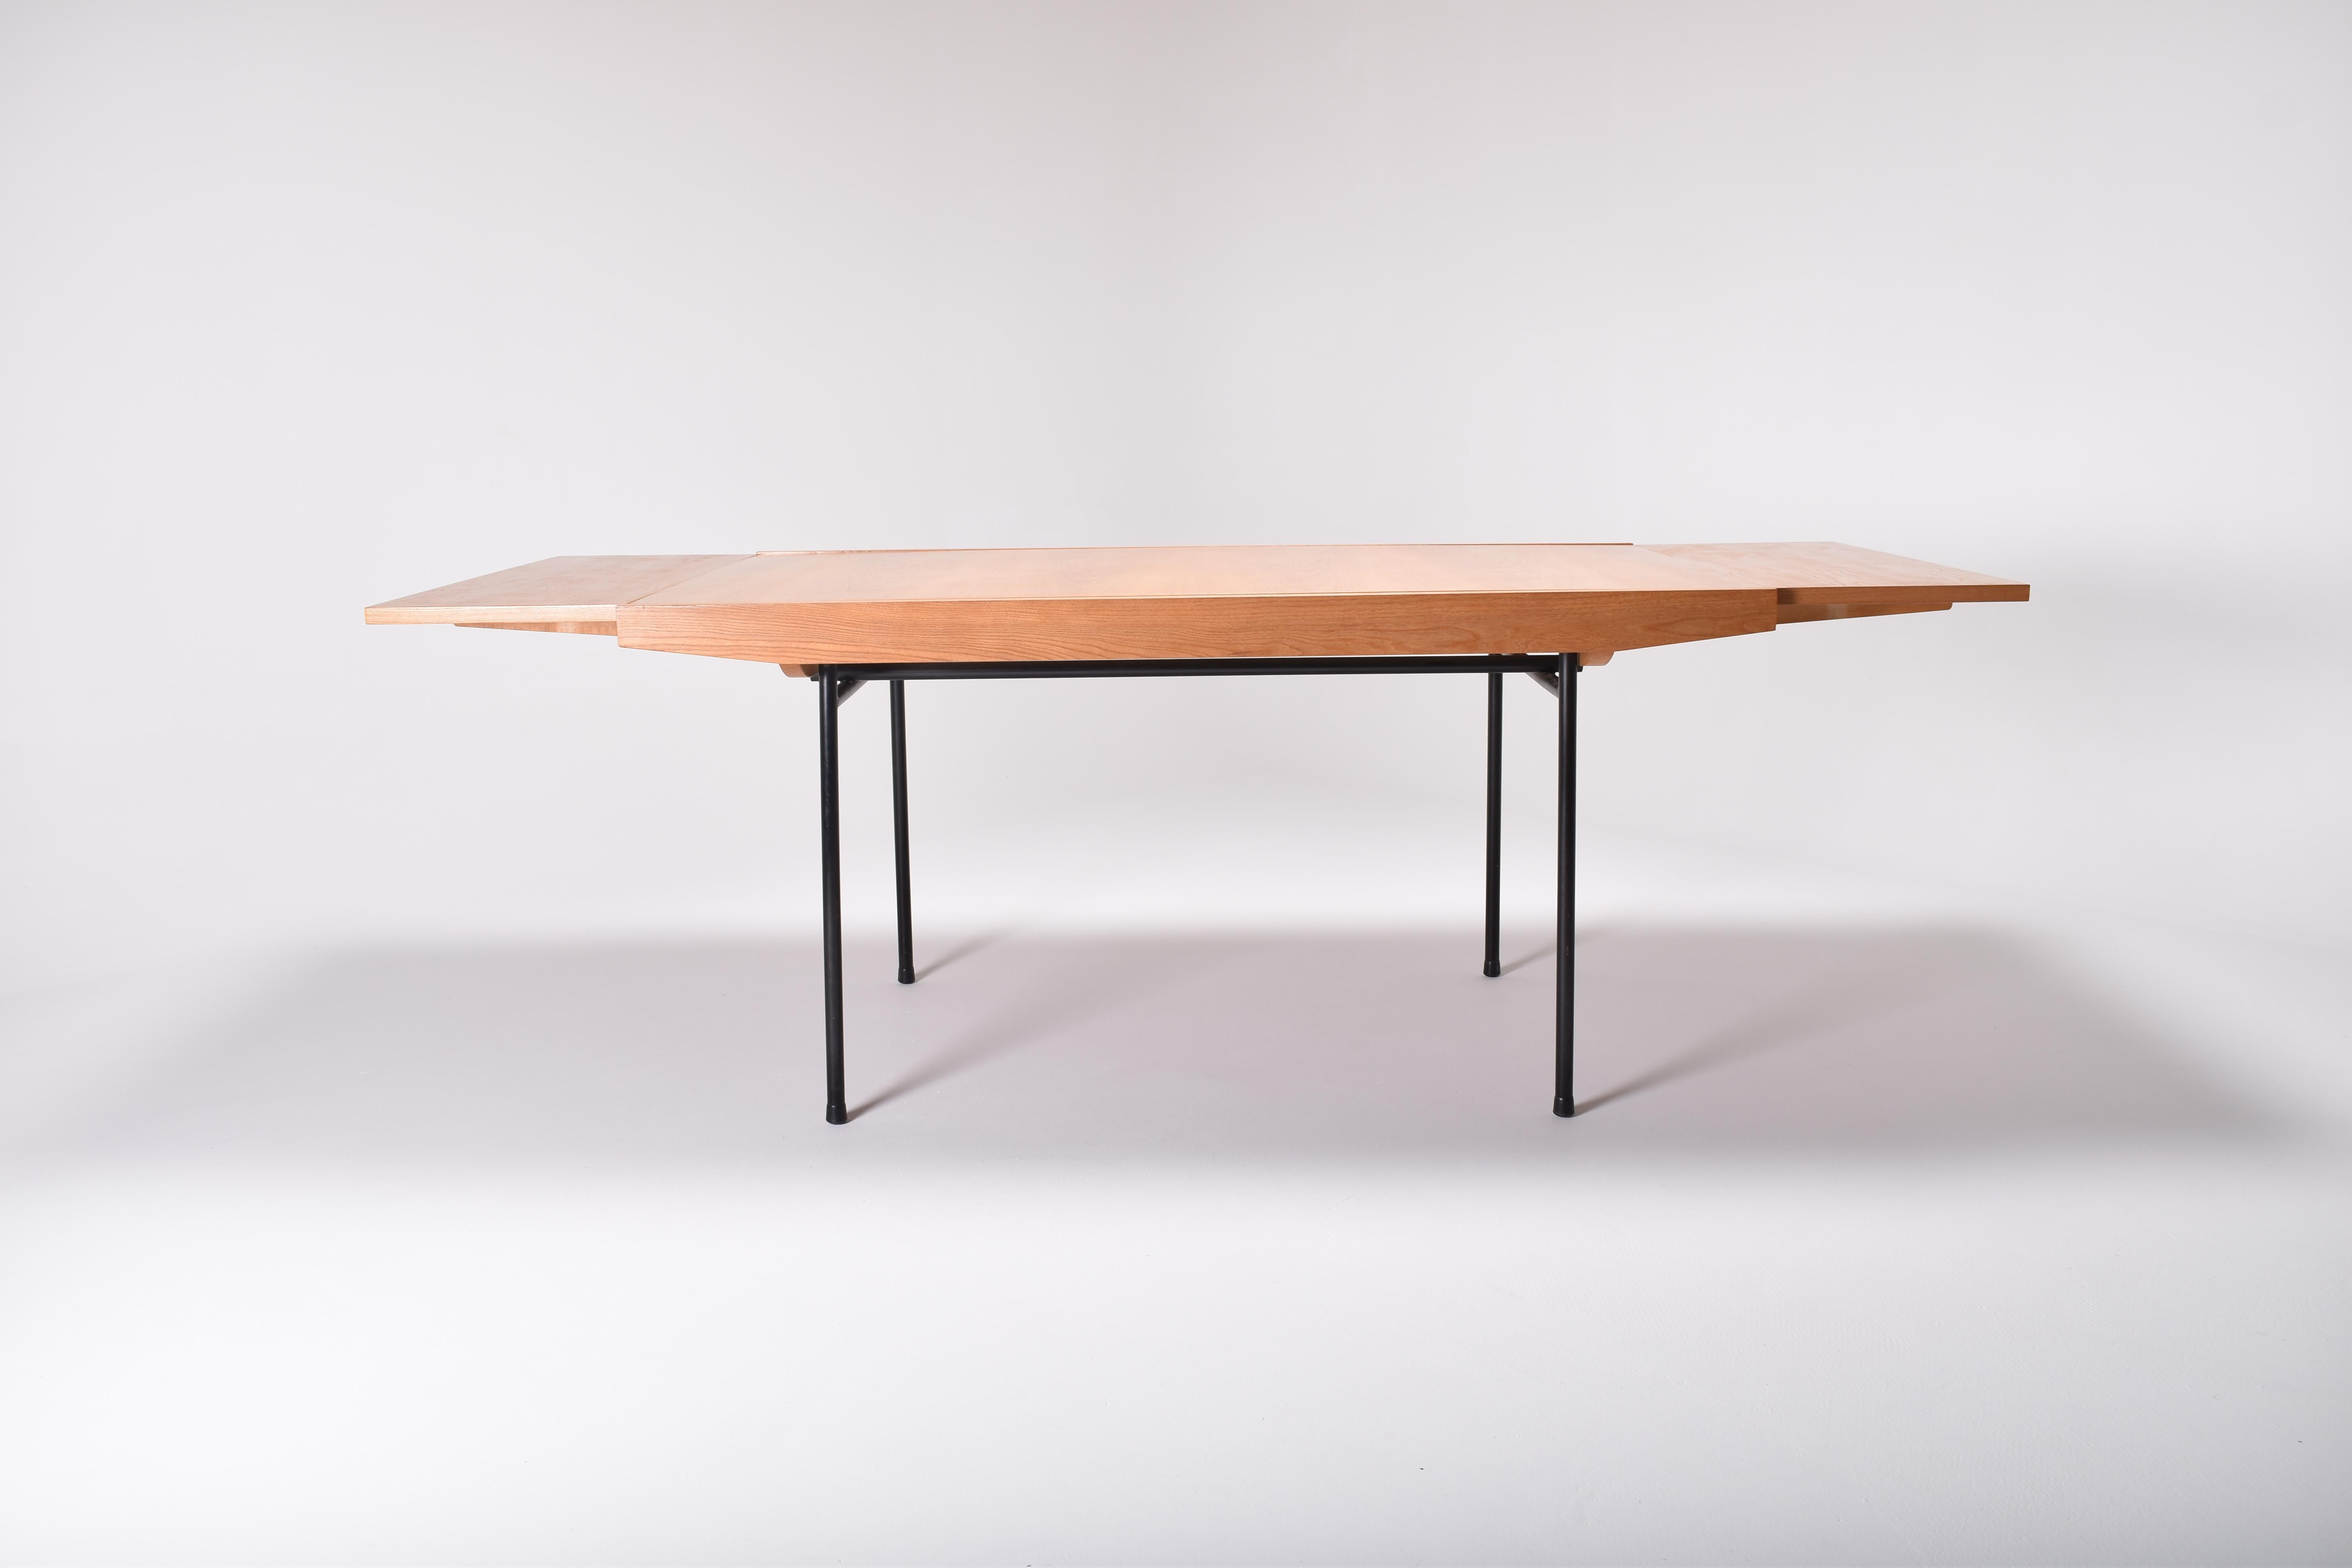 Lacquered Mid-Century Modern Elm Dining Room Table by Alain Richard for Meubles TV, France